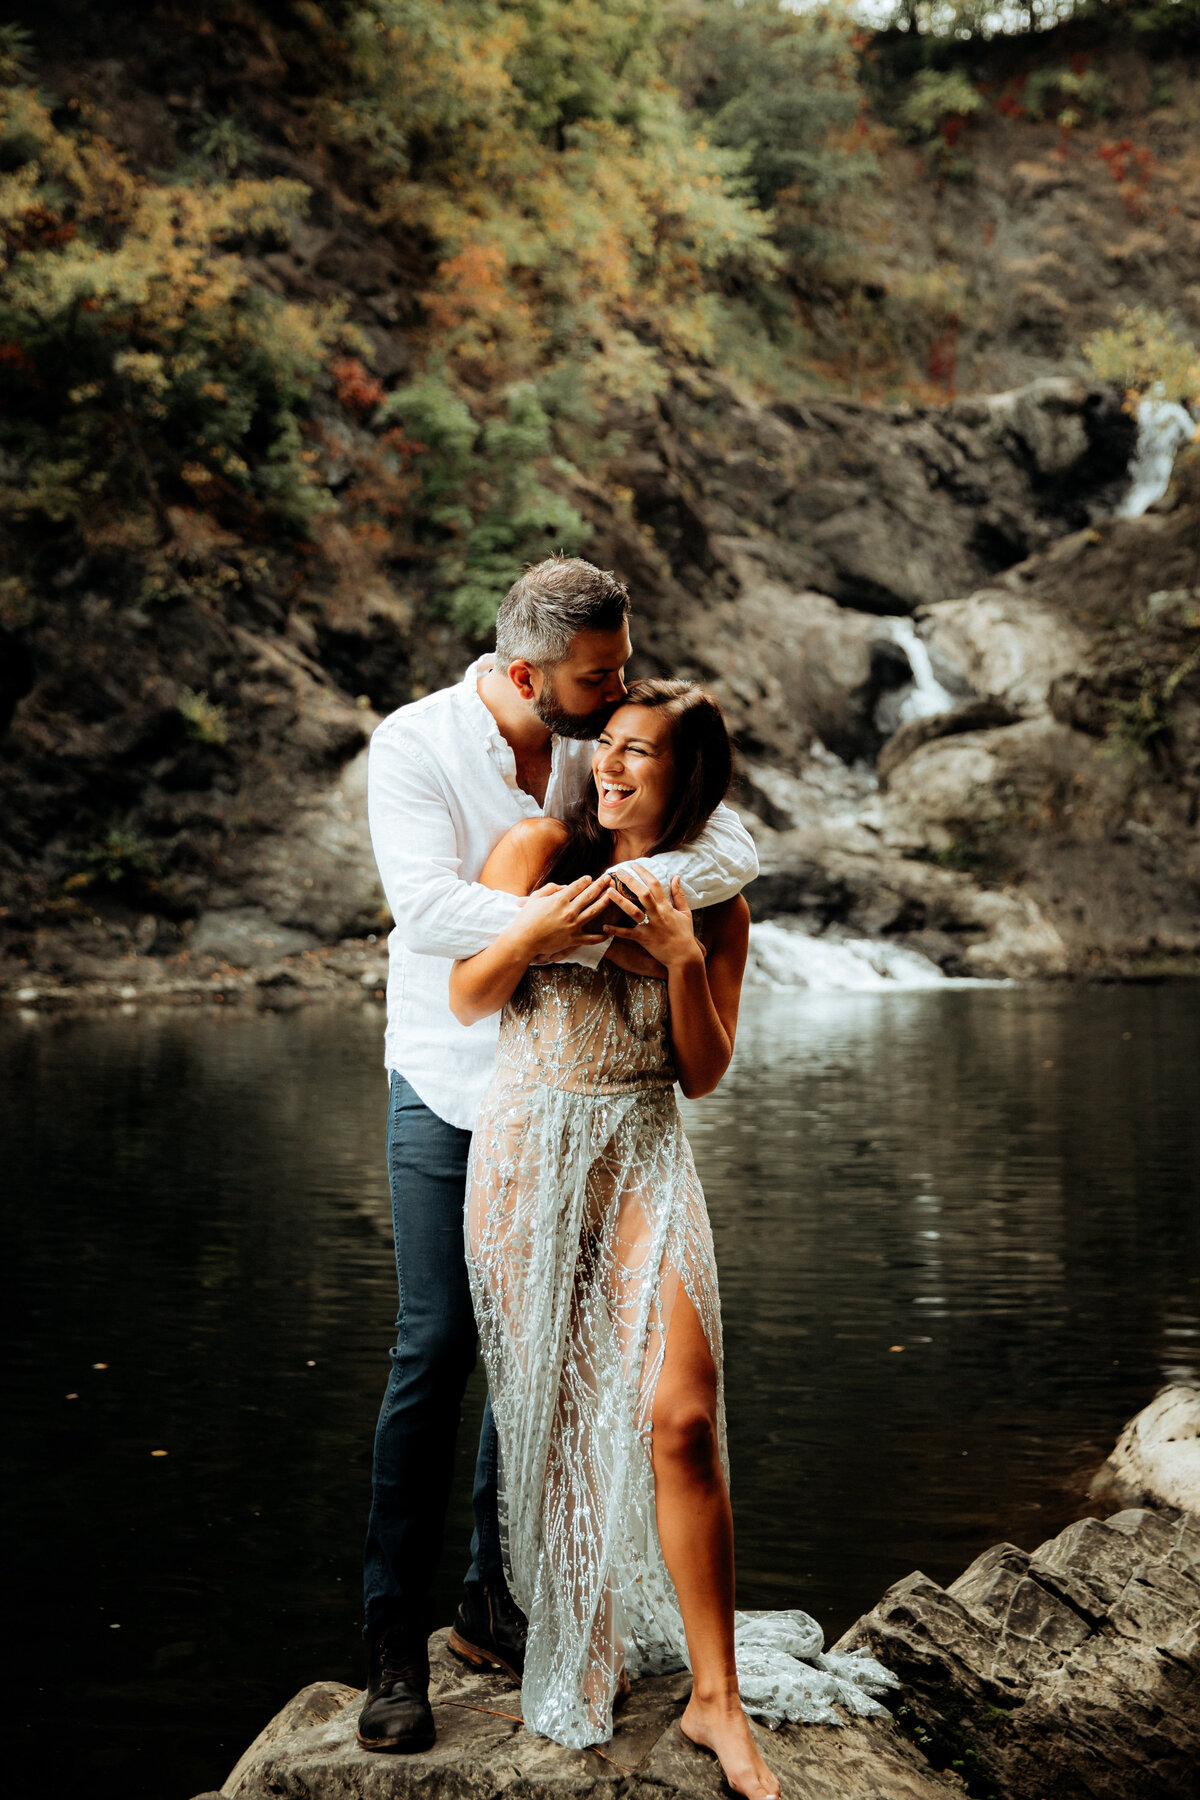 troy--upstate-ny-waterfall-engagement-photography-16